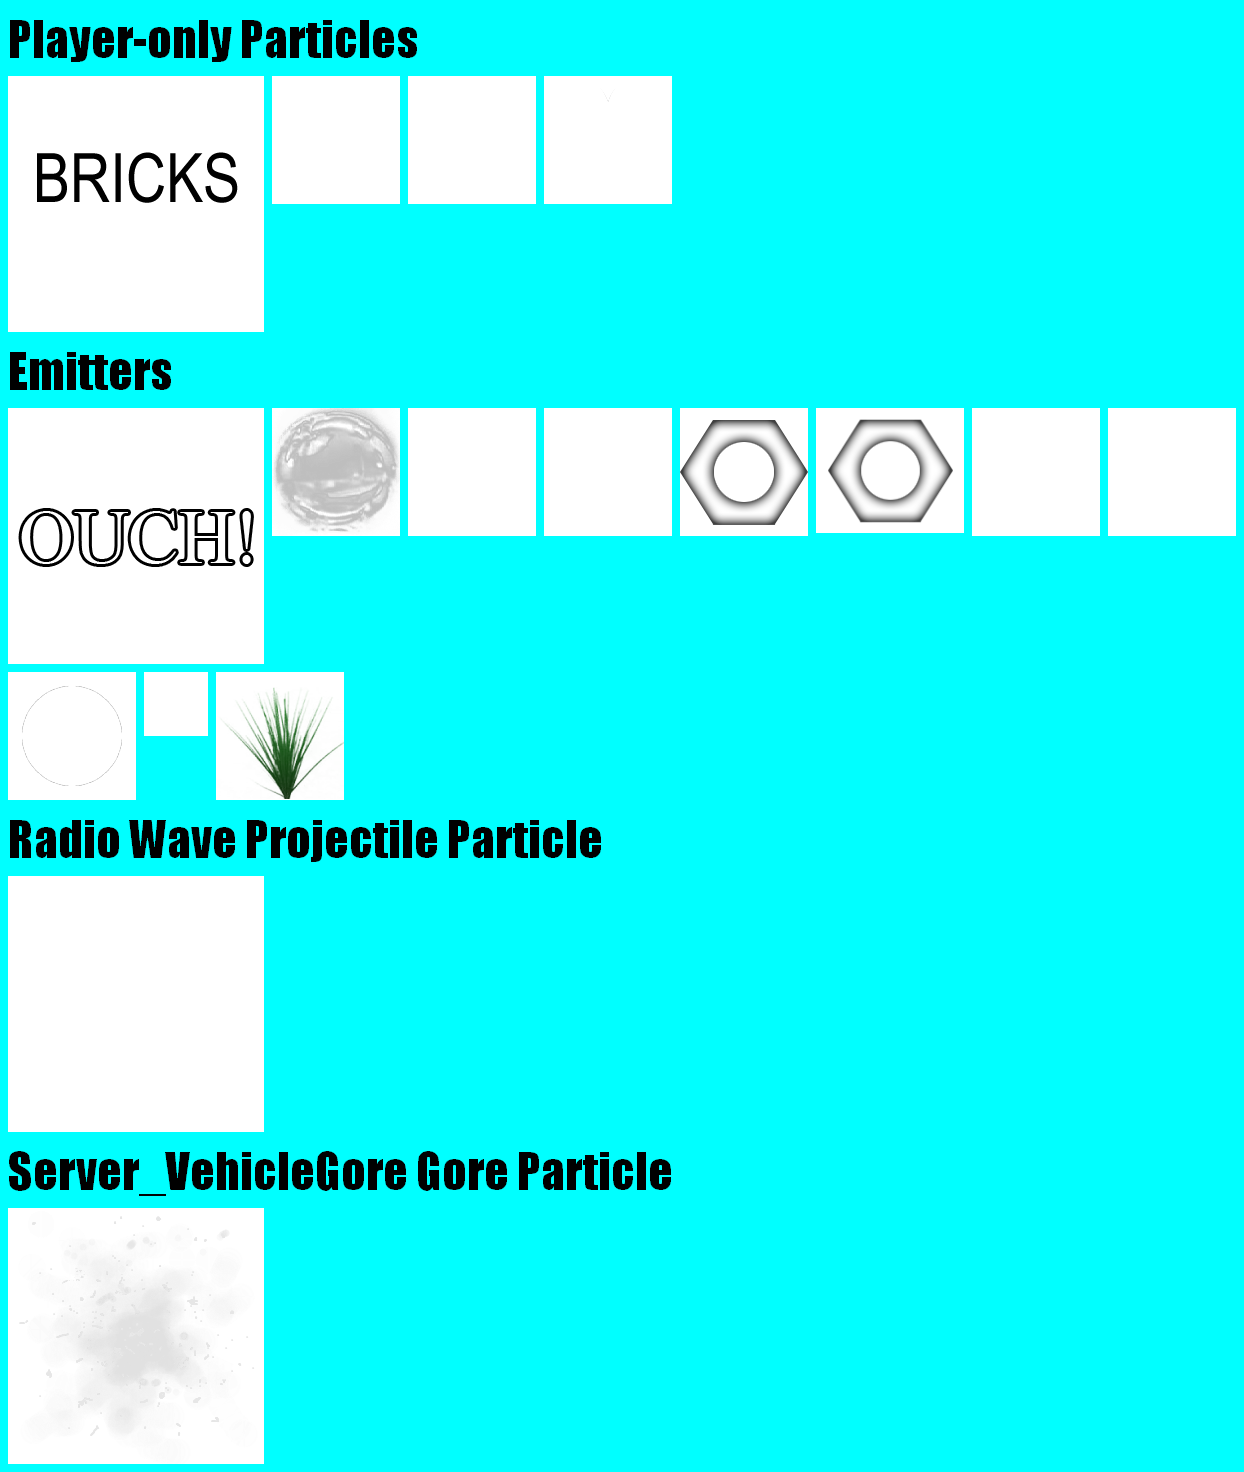 Brick Emitters and Particles